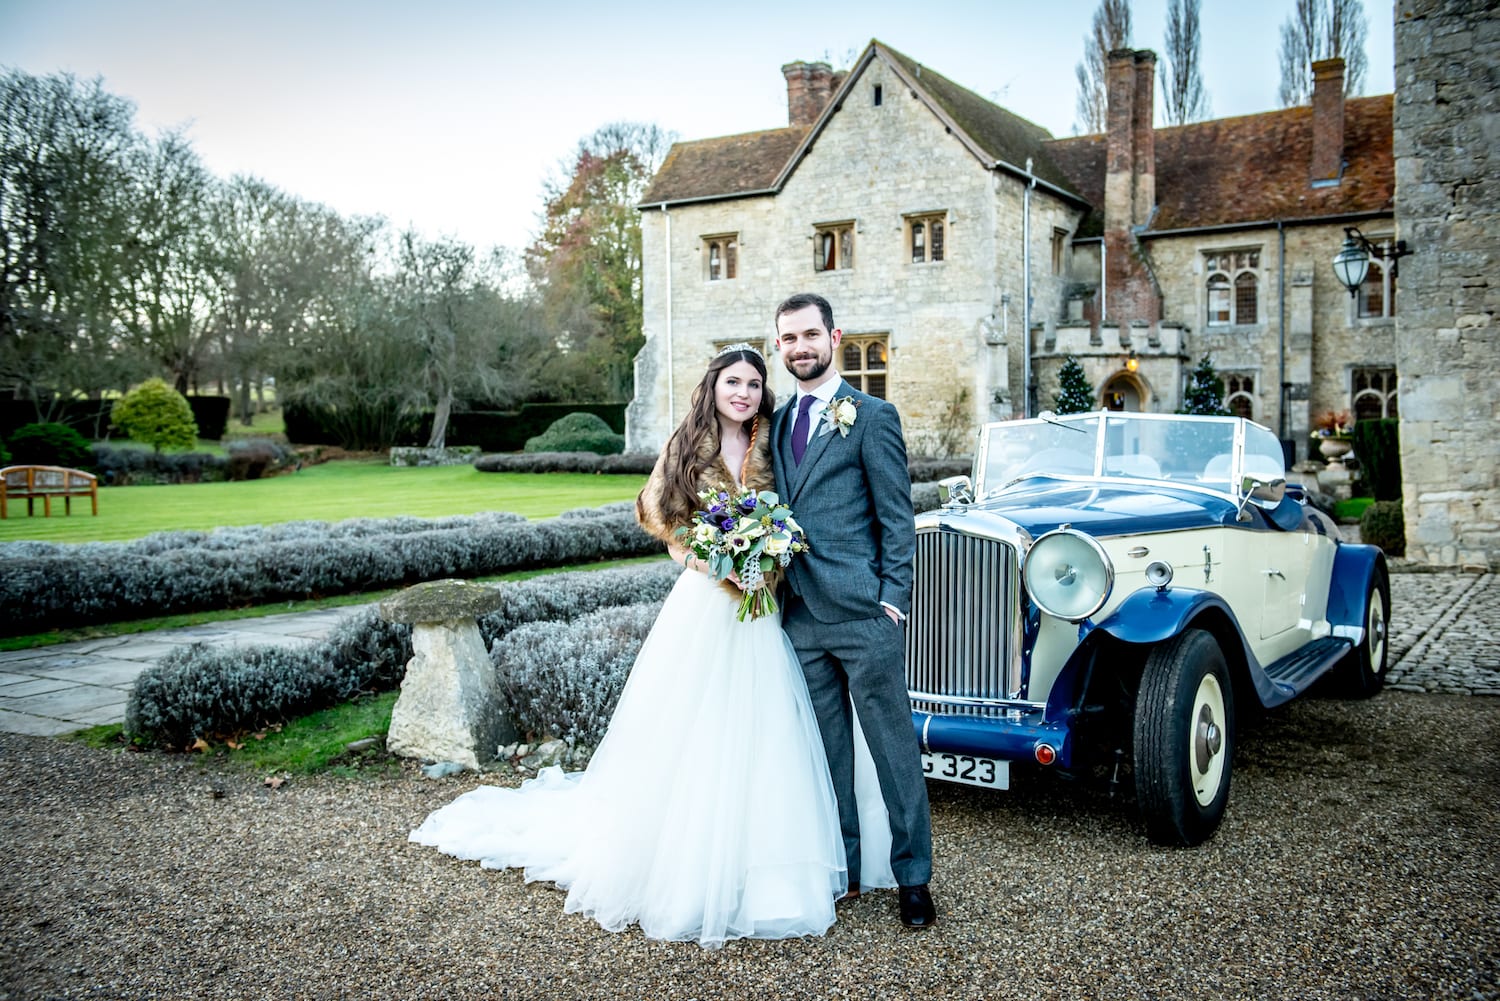 Emma and James’ Wedding at Notley Abbey